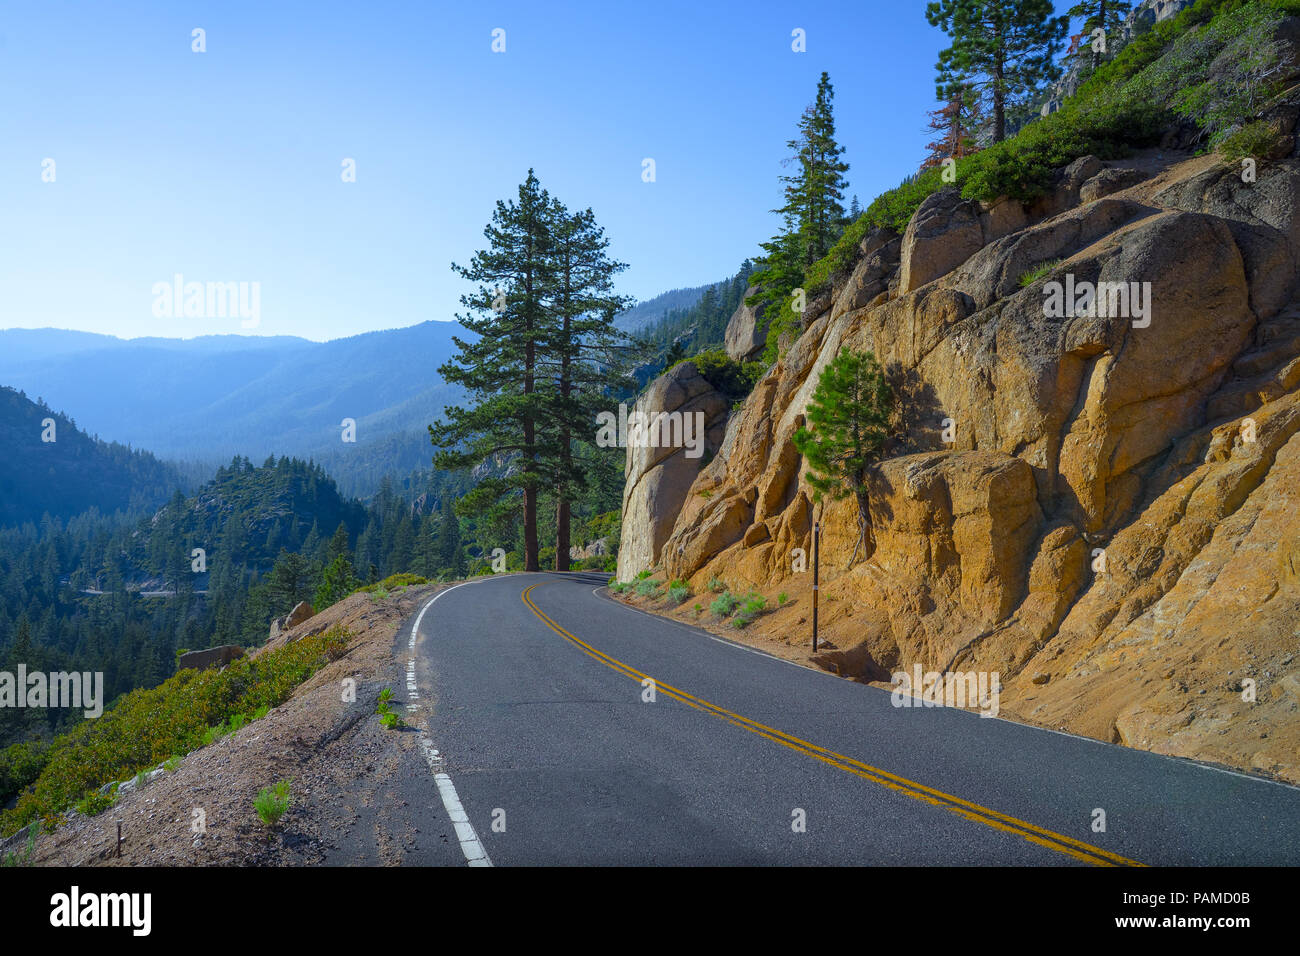 A high elevation descent and curve in the road - Highway 108, California Stock Photo